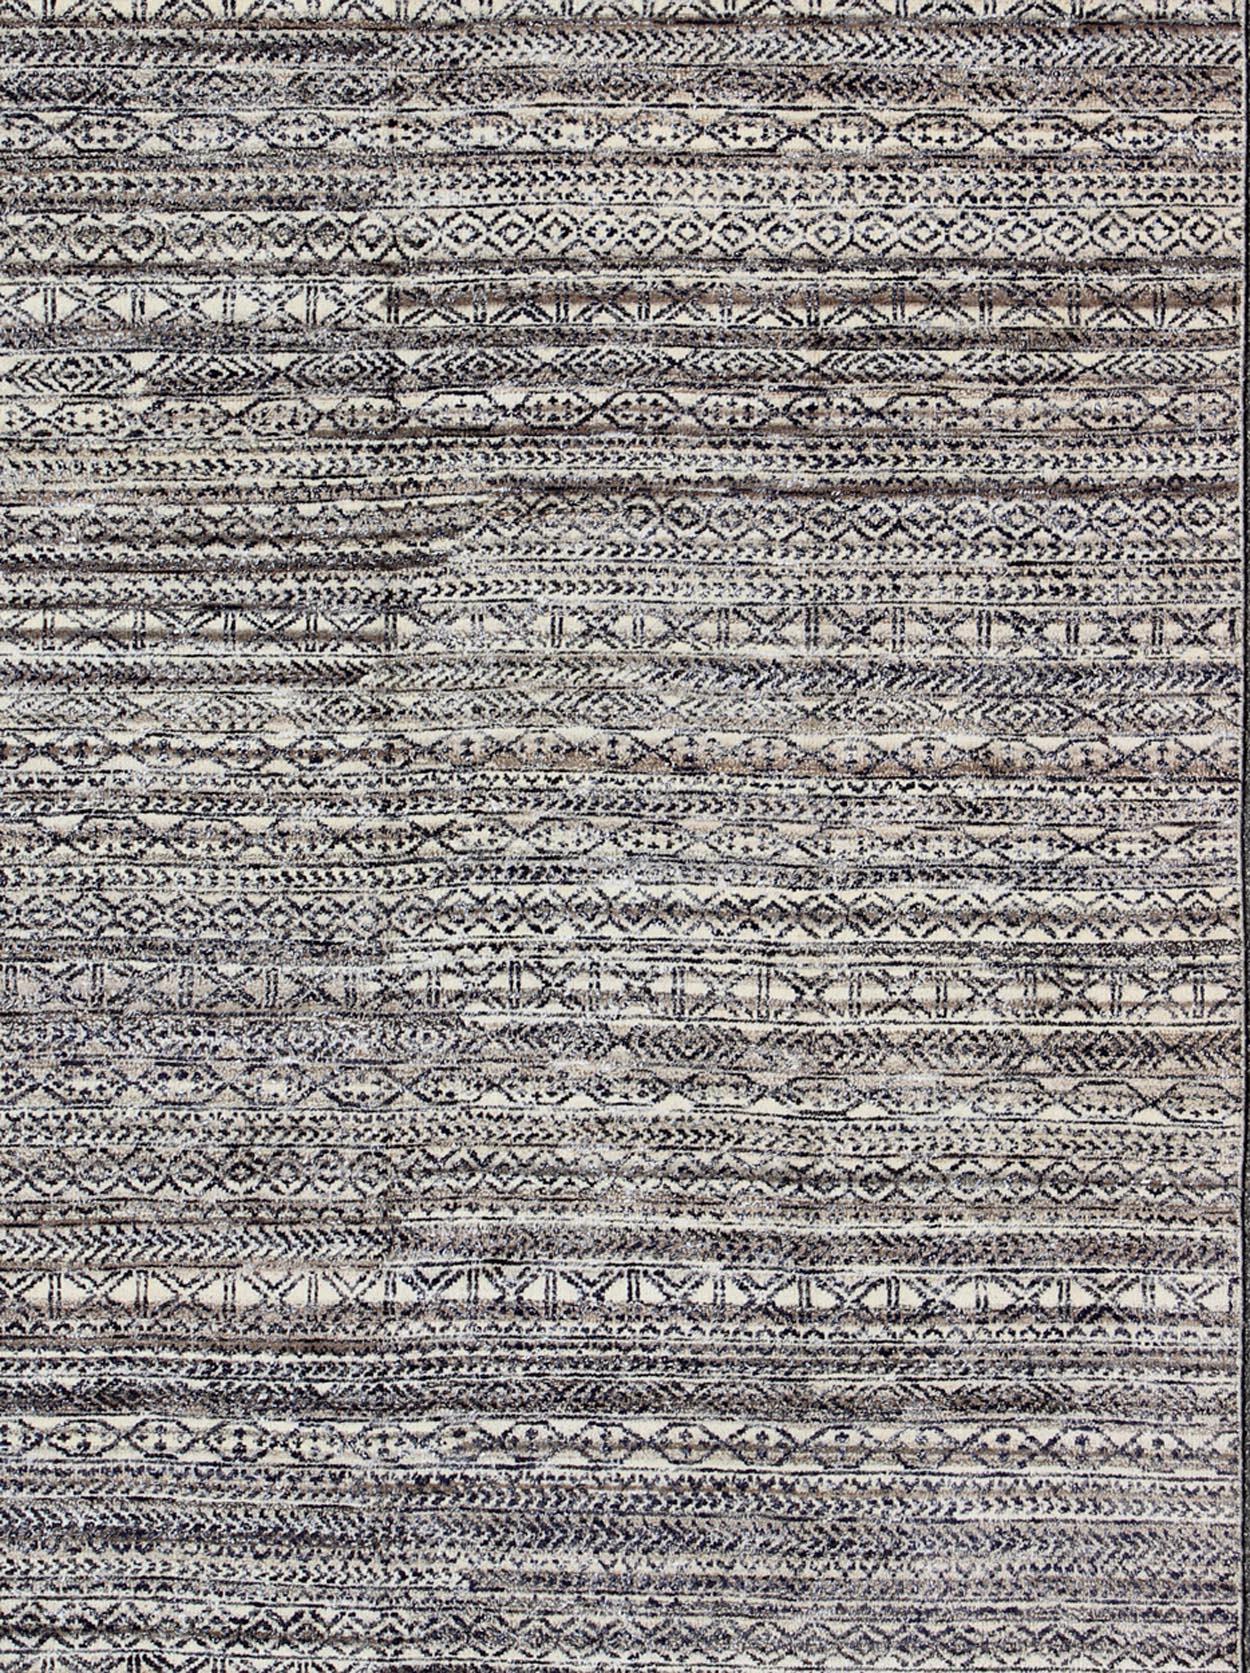 Shades of royal blue and charcoal modern Indian piled rug, rug KHN-417-TR-D2-60, country of origin / type: India / Scandinavian piled rug.

This modern rug is inspired by the work of textile designers of the early to mid-20th century. With a